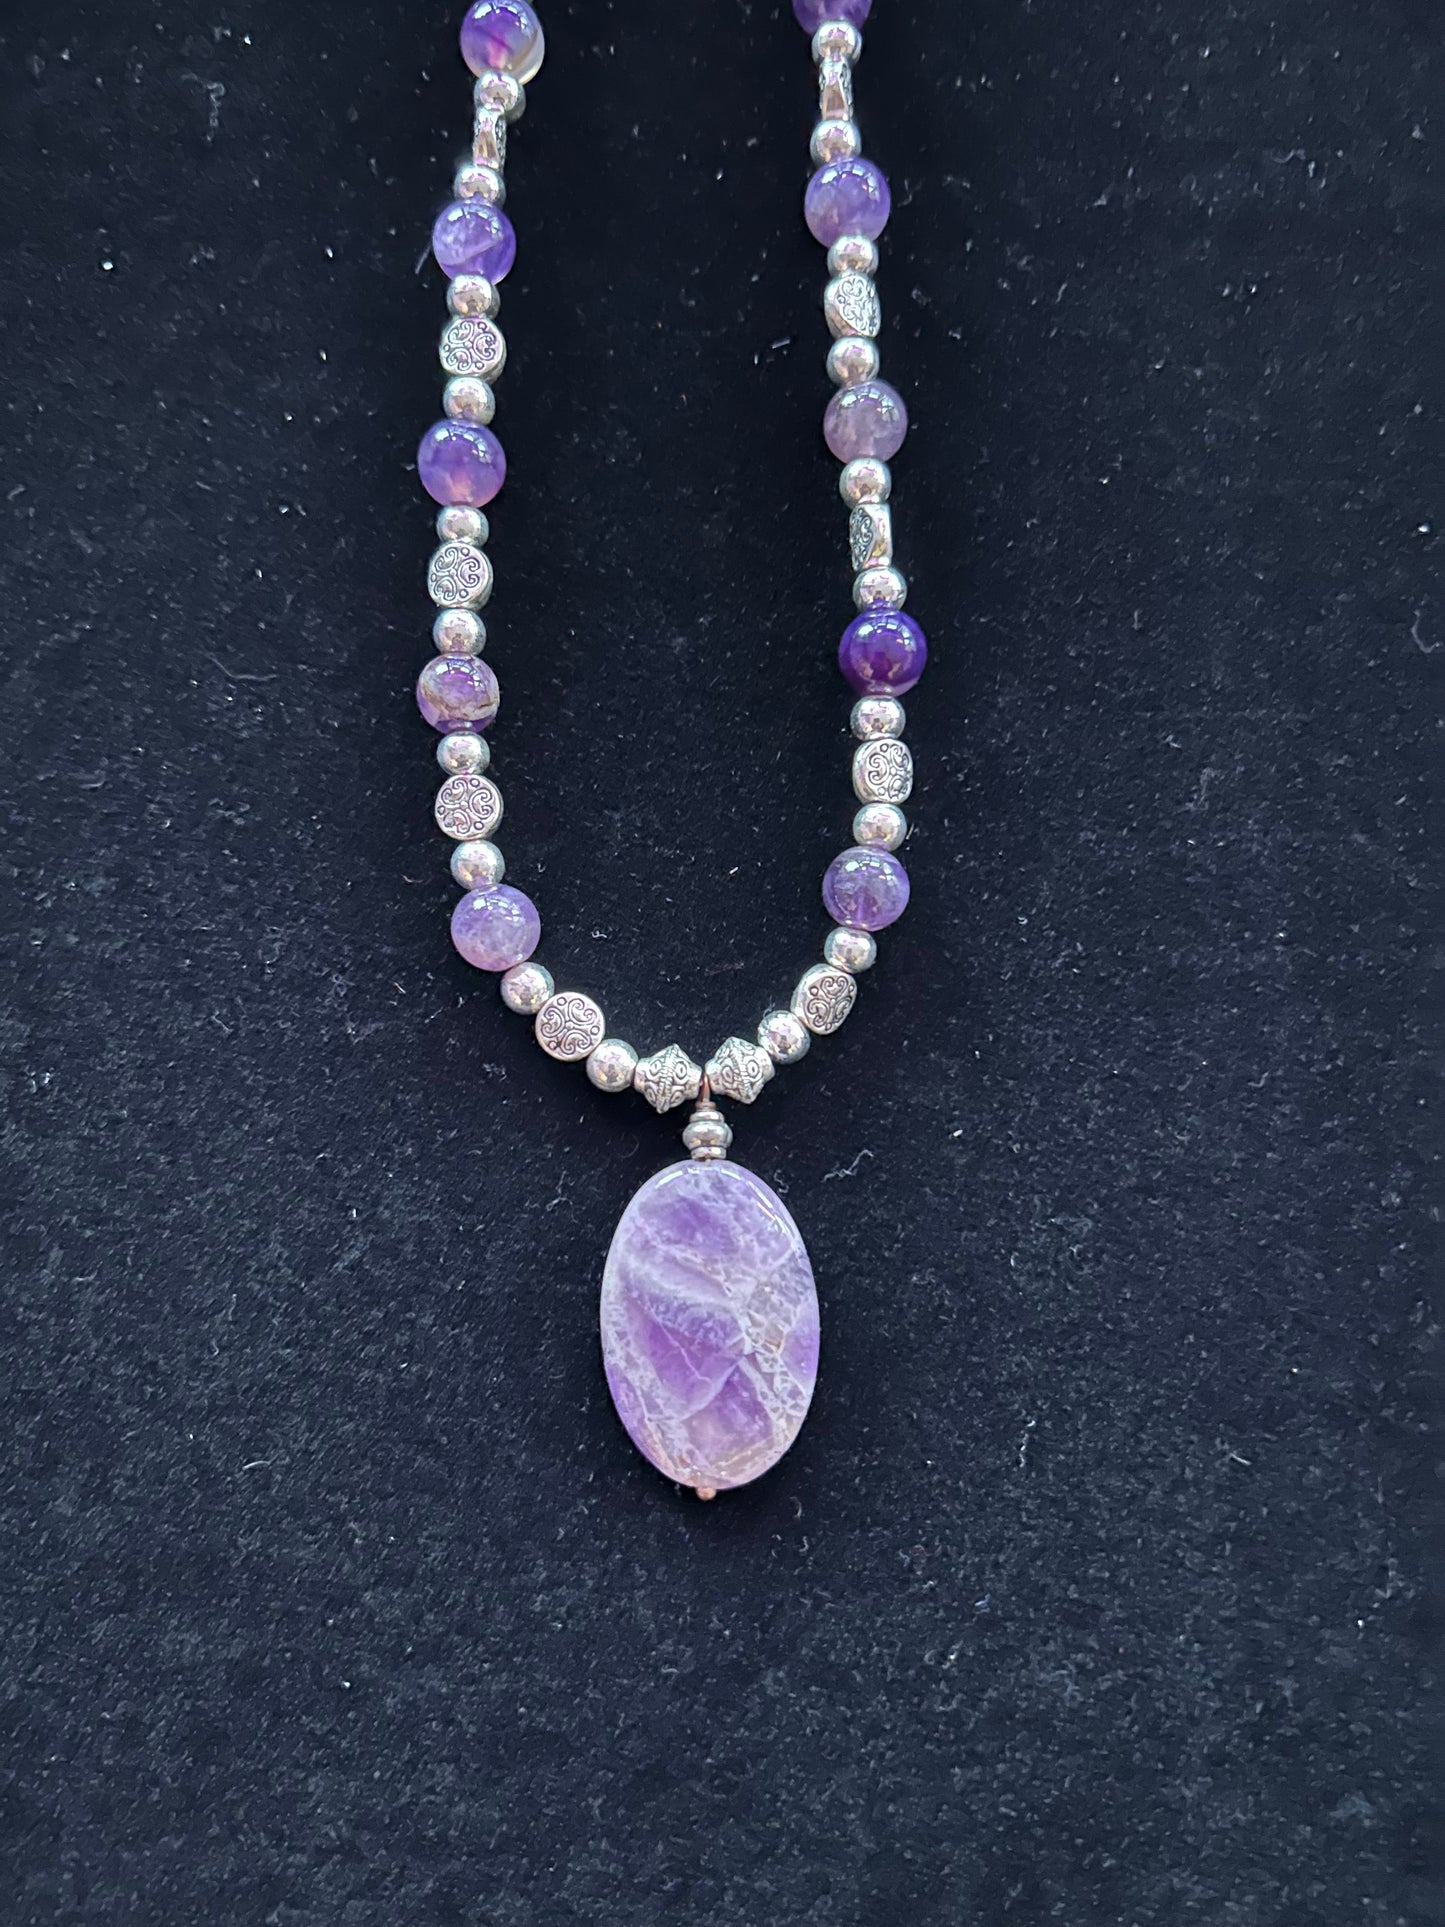 Amethyst Oval Pendant Necklace